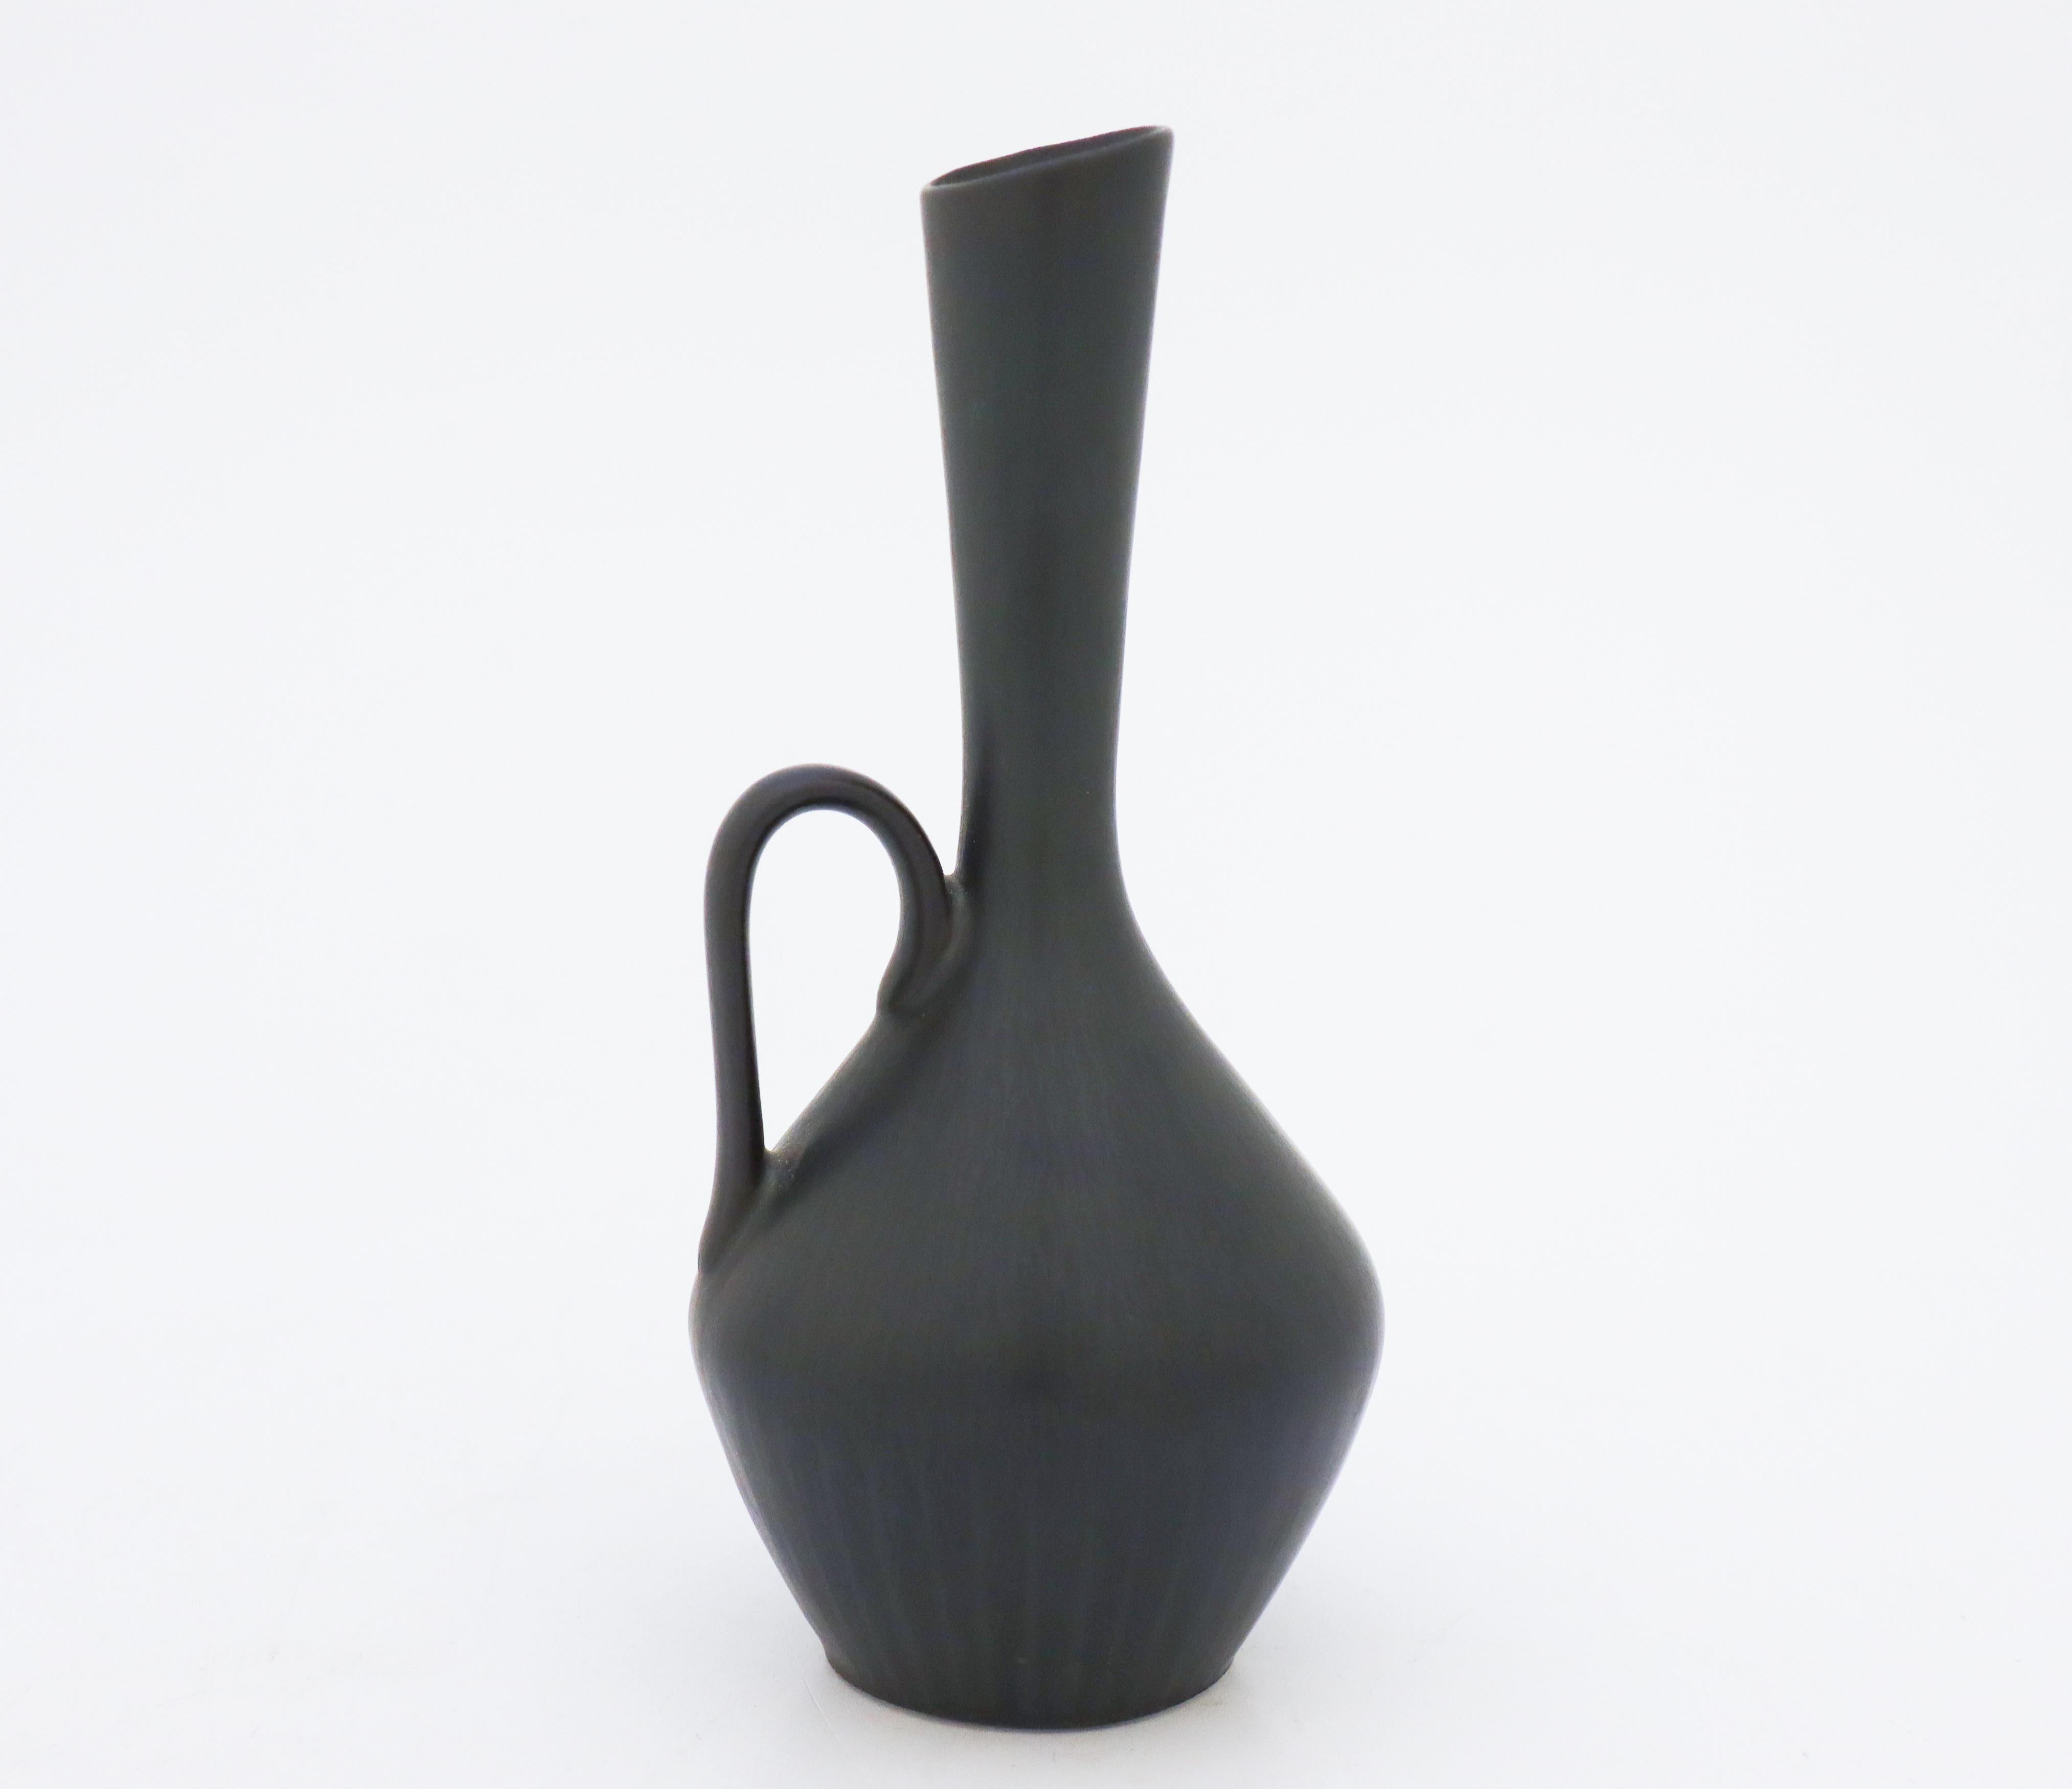 A beautiful midcentury Swedish vase in stoneware by Rörstrand, designed by Carl-Harry Stålhane.